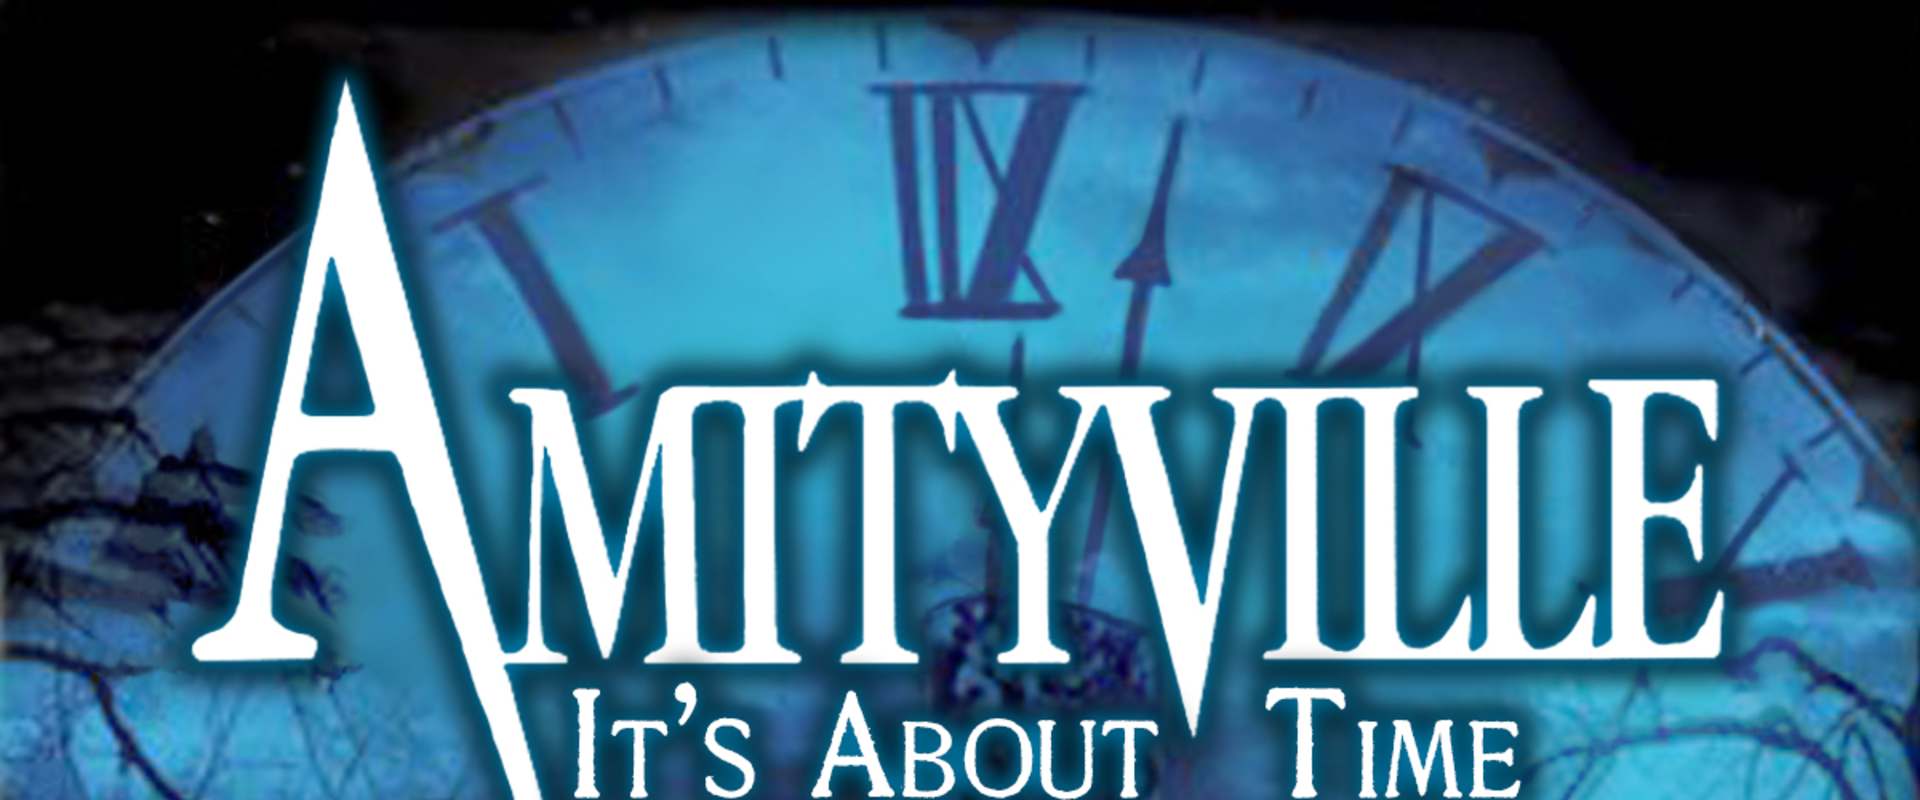 Amityville 1992: It's About Time background 1